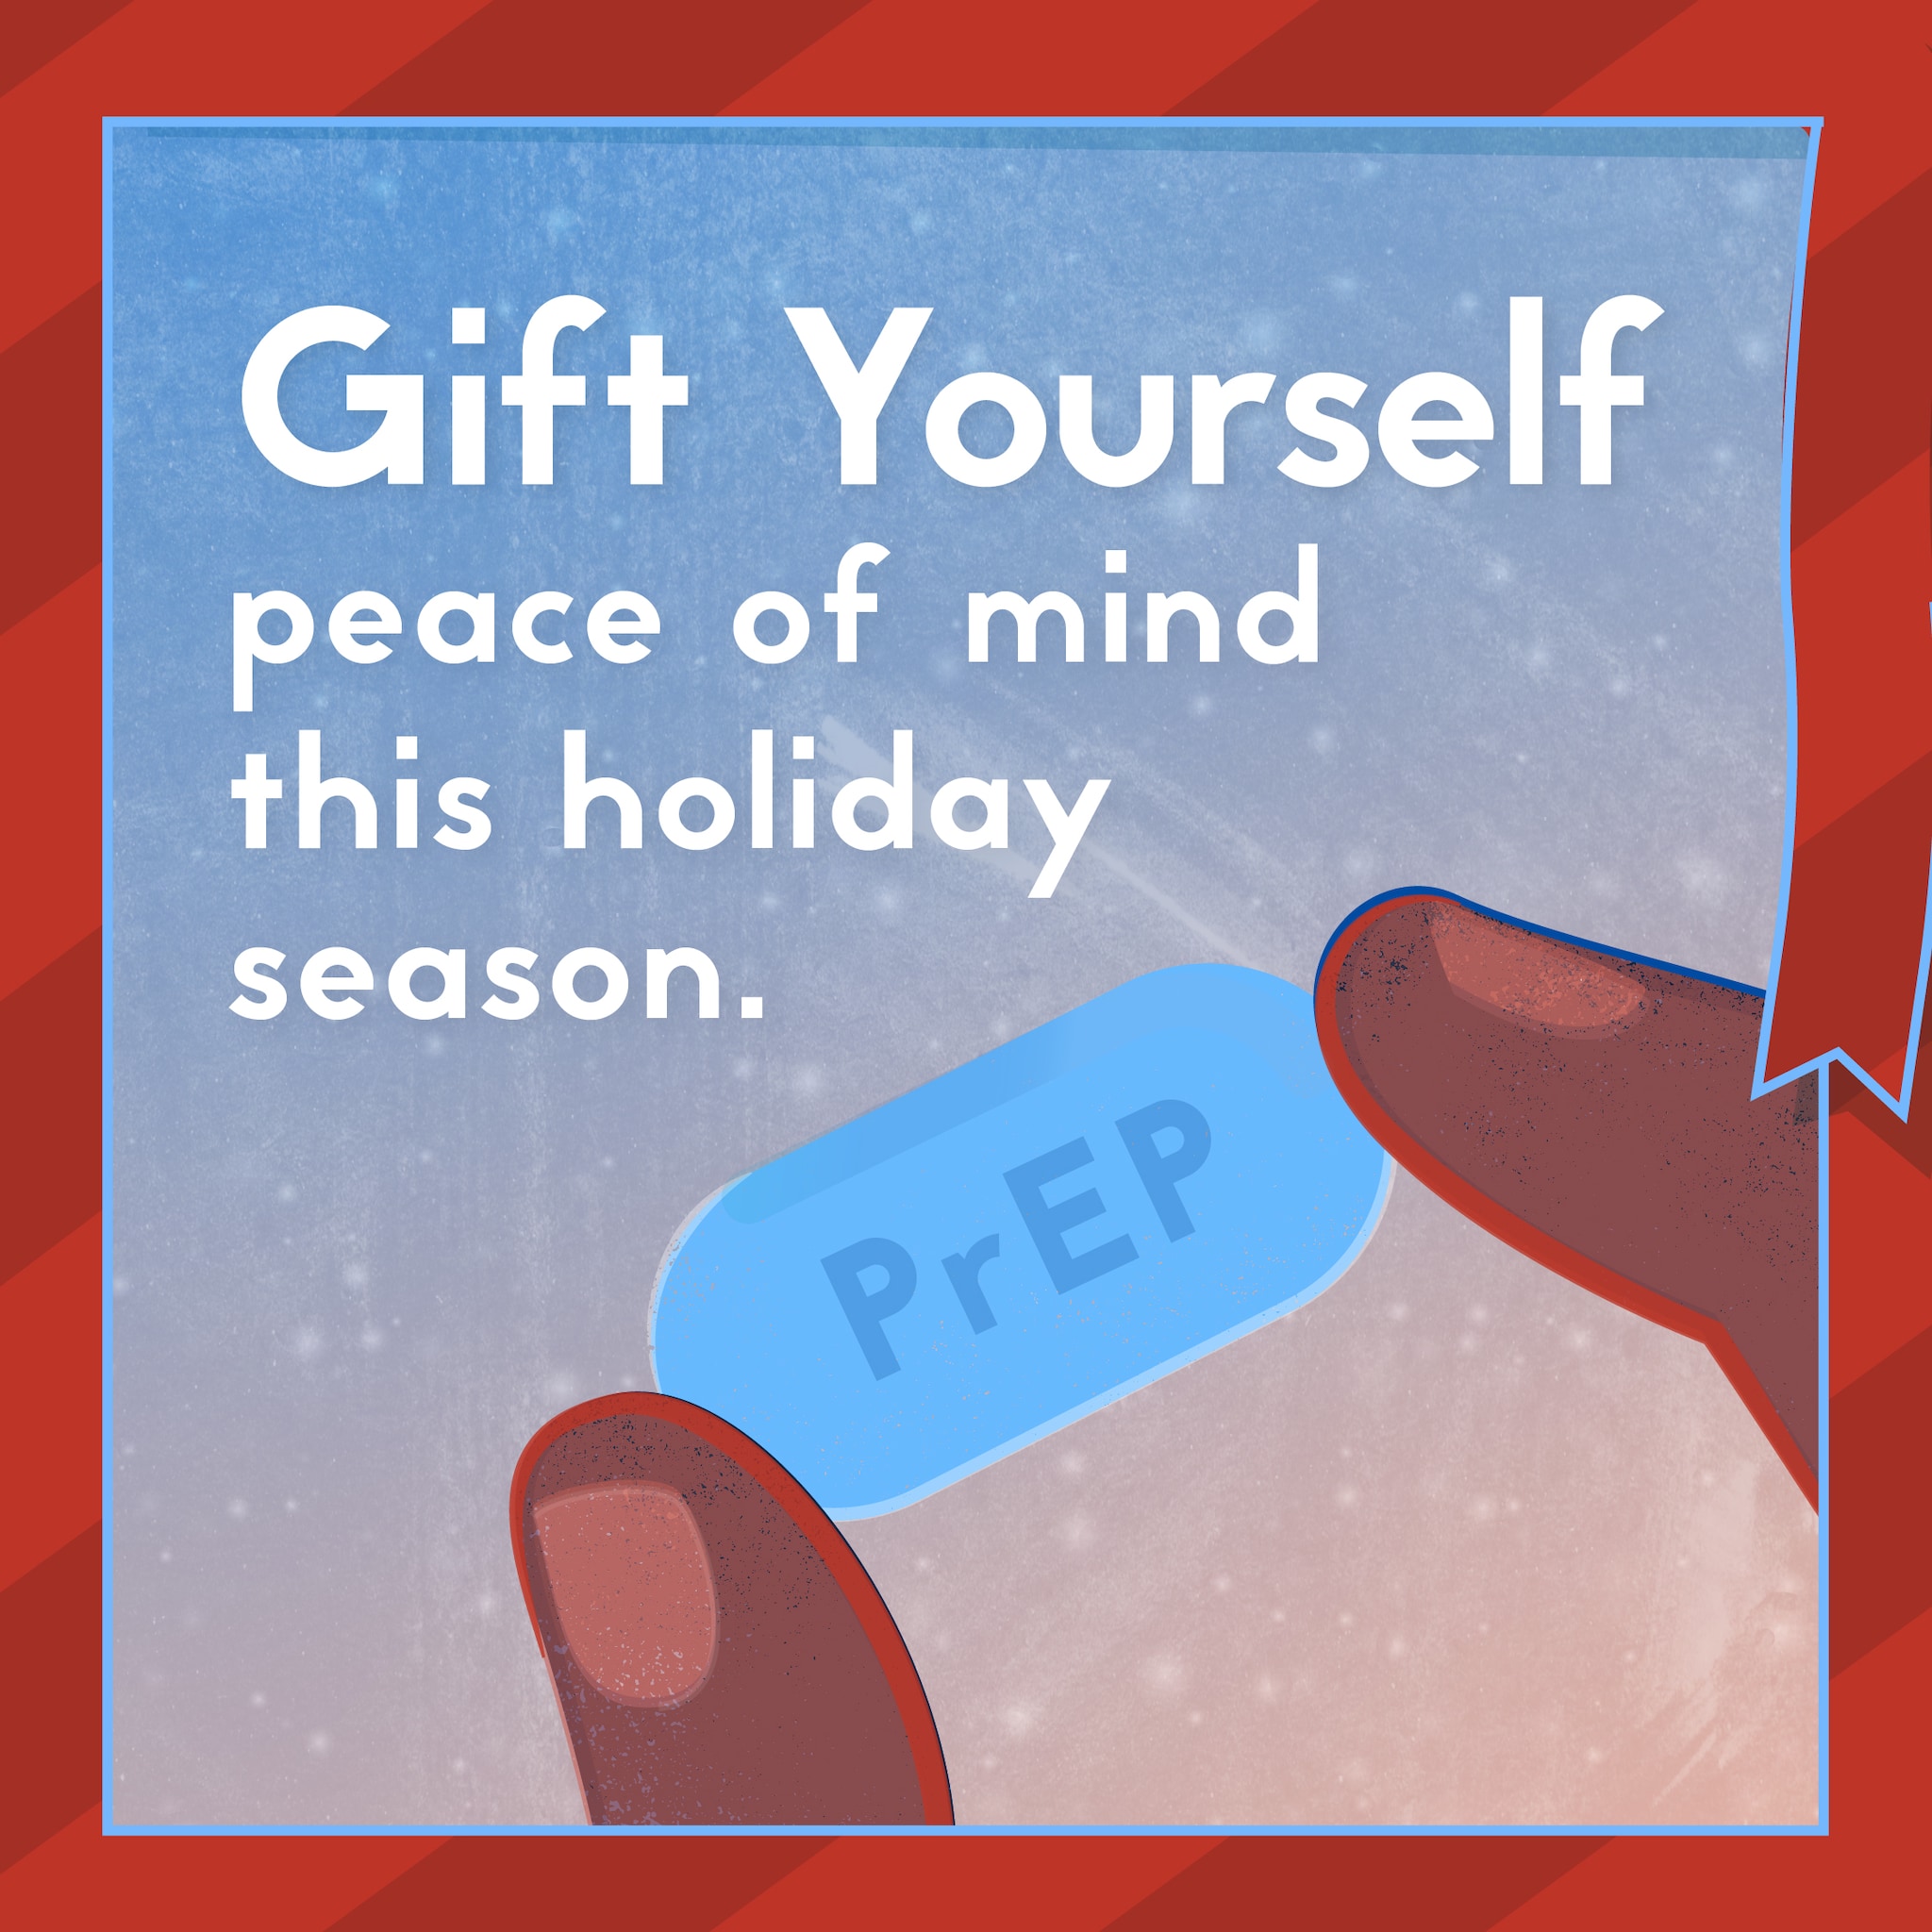 An image of a hand holding a PrEP pill displaying the phrase Gift yourself peace